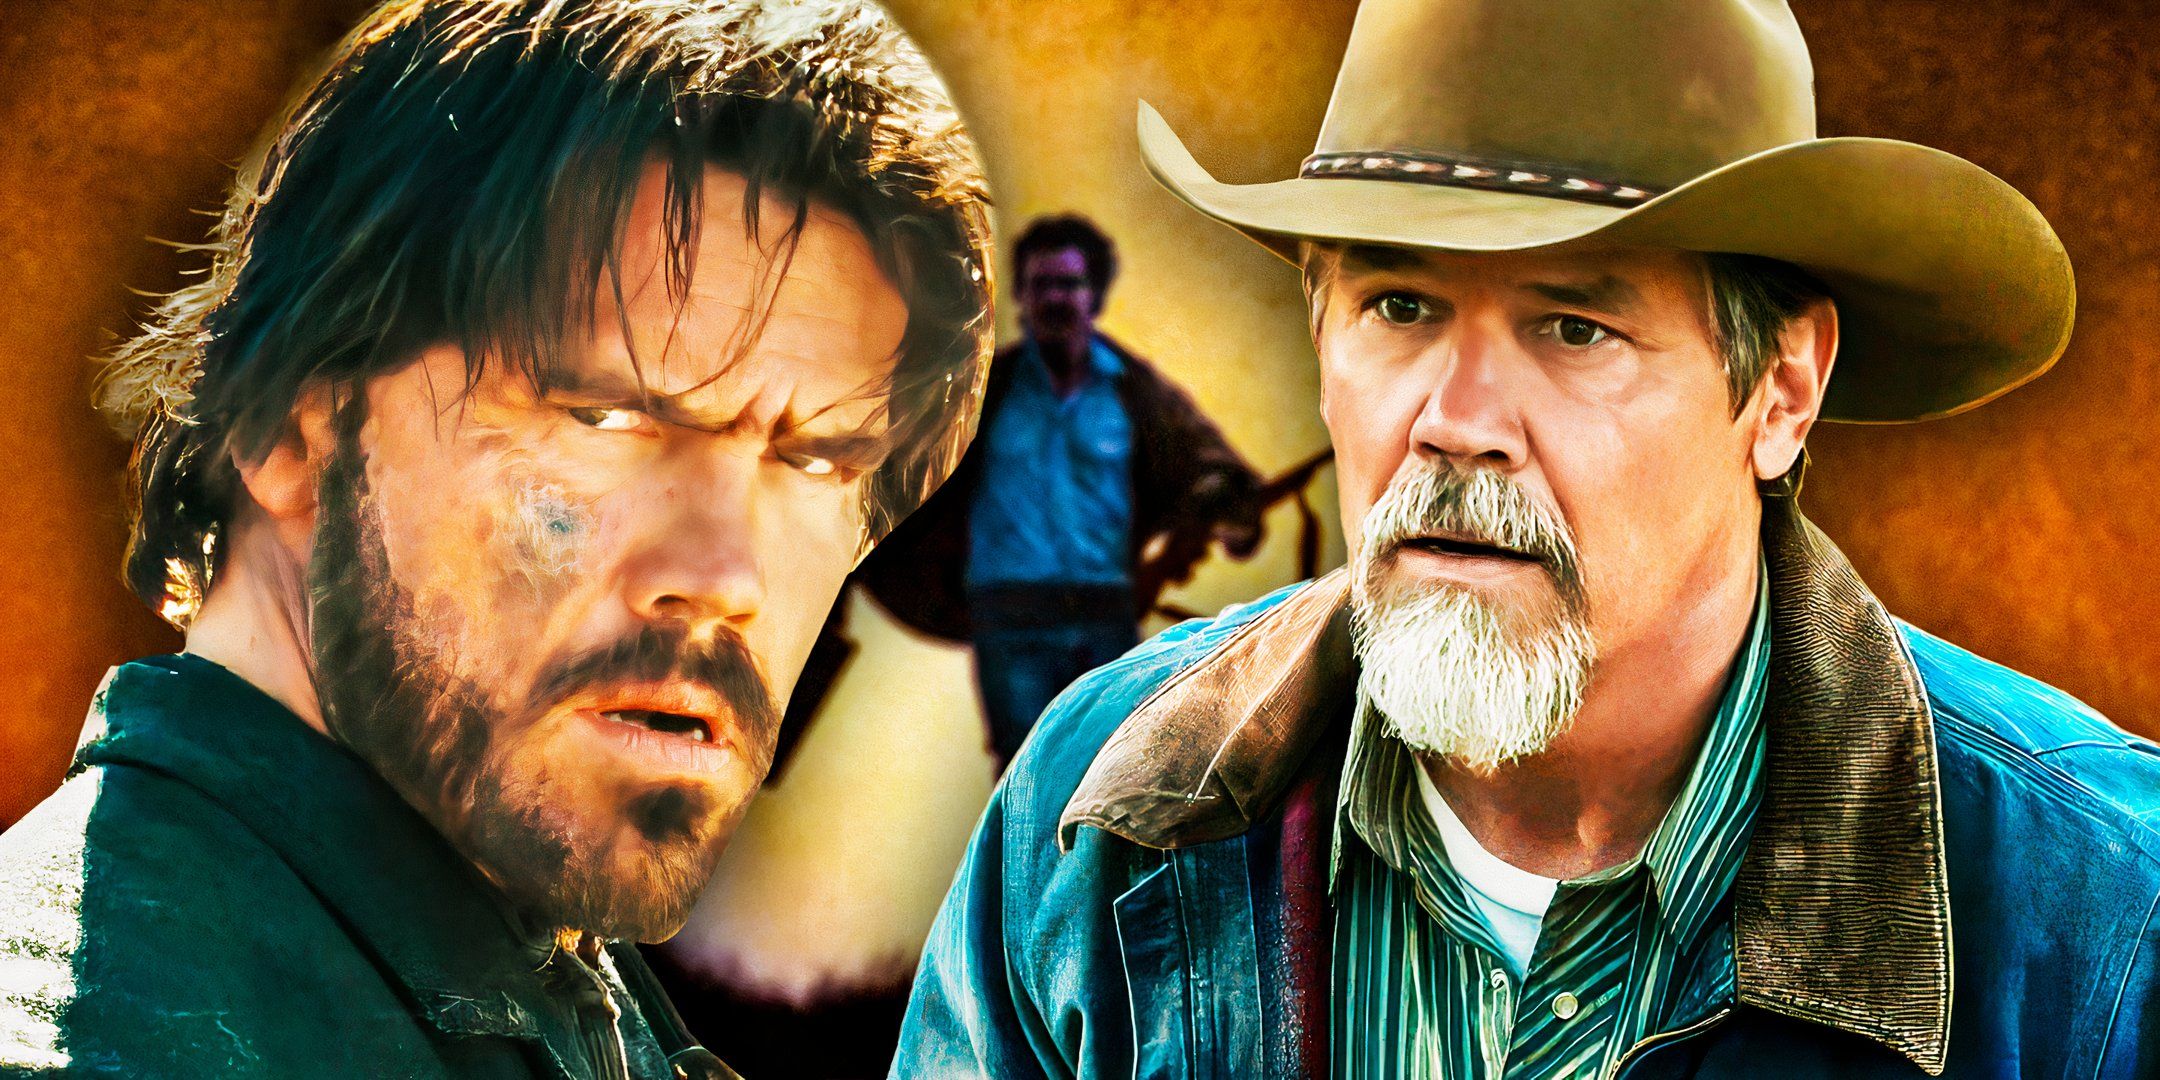 Josh Brolin as Royal Abbott from Outer Range and Josh Brolin as Tom Chaney from True Grit